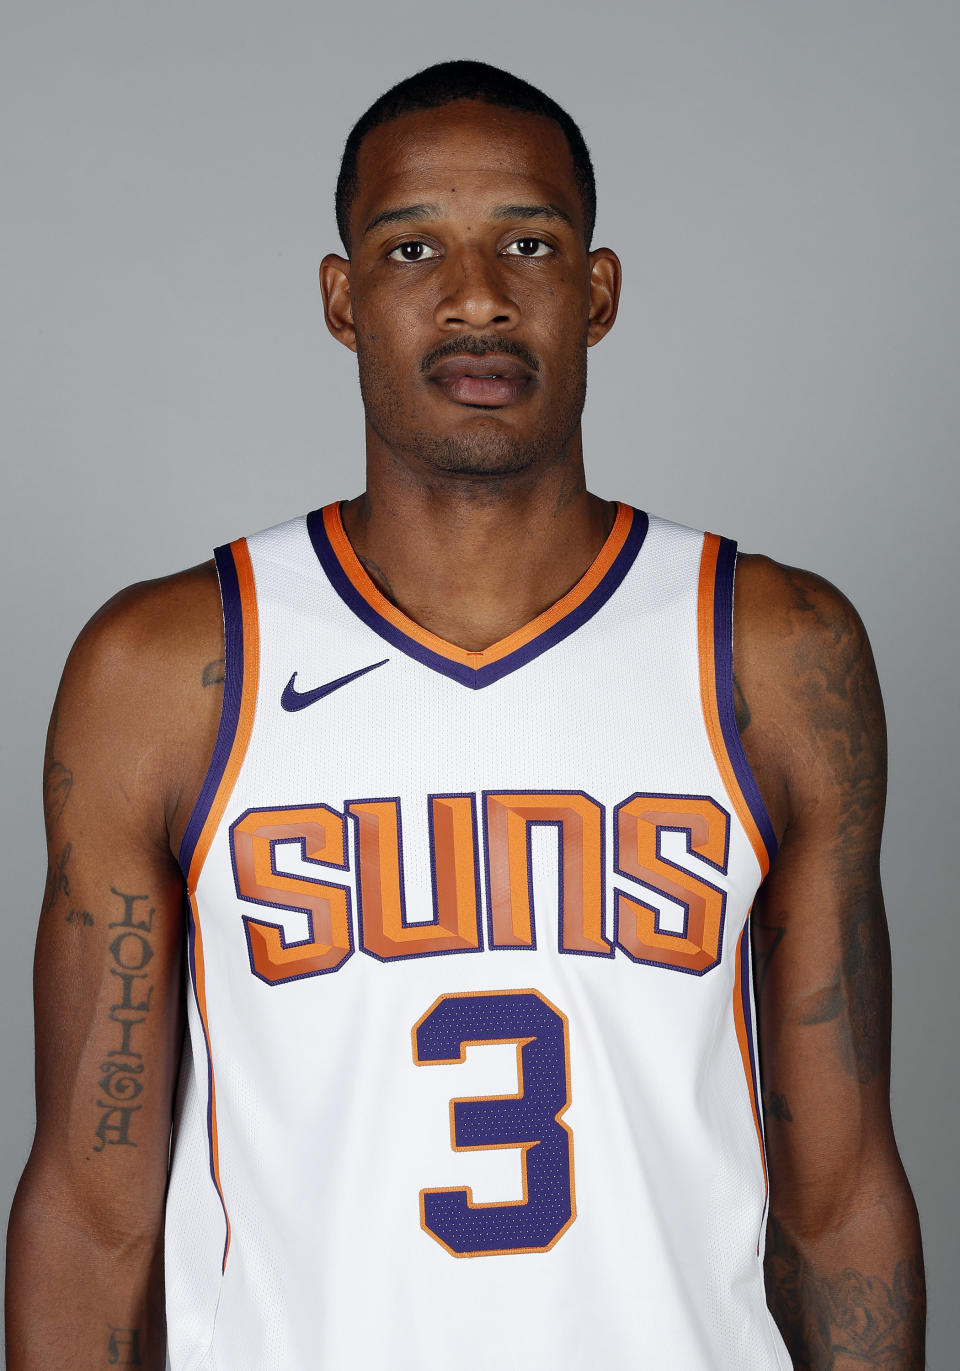 File-This photo taken Sept. 24, 2018, shows Phoenix Suns' Trevor Ariza posing for a photograph during media day at the NBA basketball team's practice facility in Phoenix. A person familiar with the deal says the Washington Wizards have an agreement in principle to acquire Ariza from the Phoenix Suns for Kelly Oubre Jr. and Austin Rivers. The person spoke to The Associated Press on condition of anonymity Saturday, Dec. 15, 2018, because it had not been announced by either team. (AP Photo/Matt York, File)